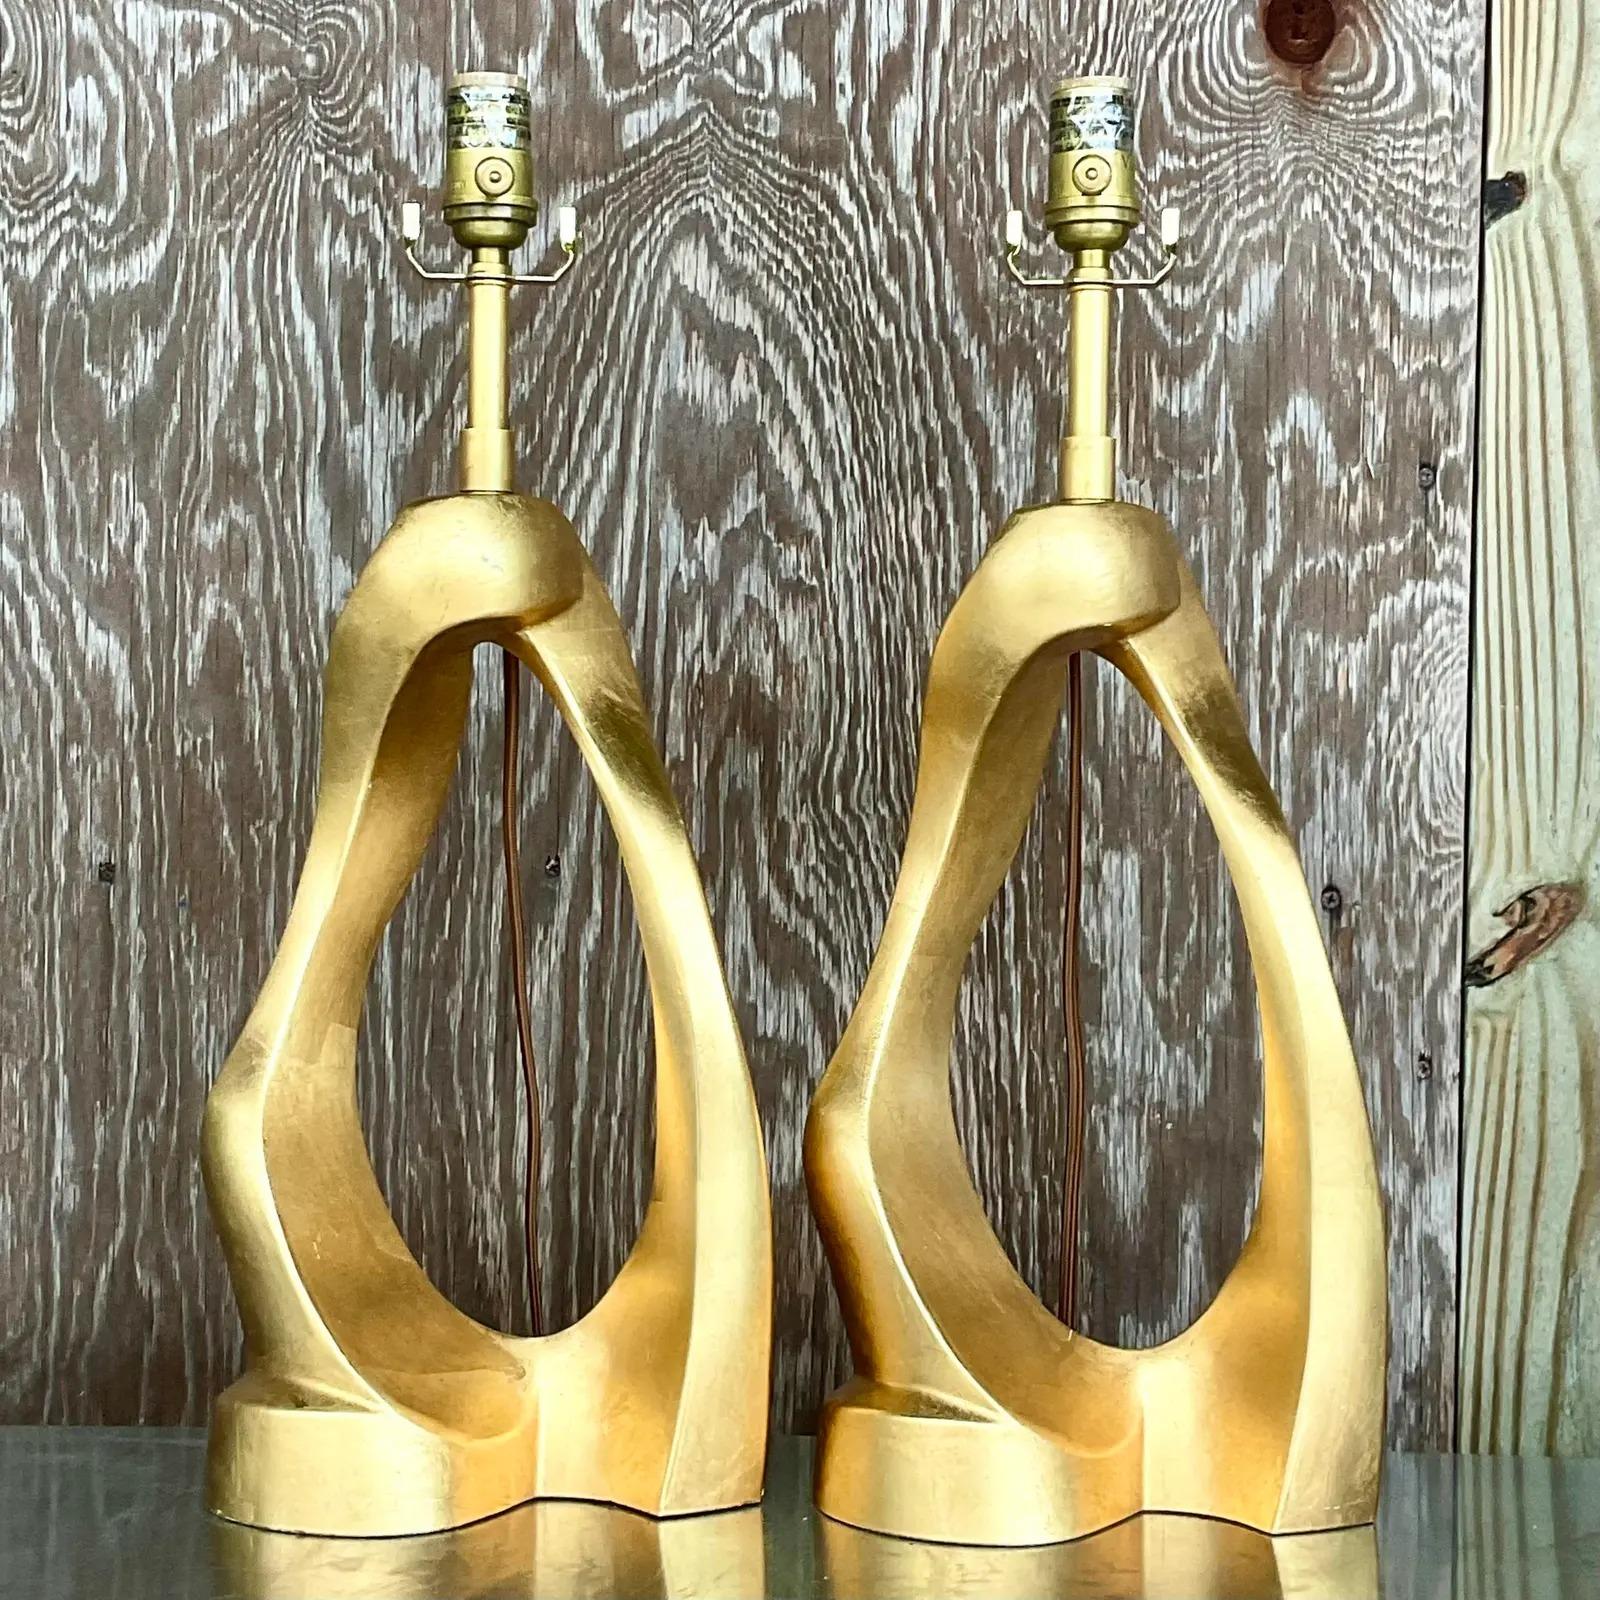 A stunning pair of vintage contemporary table lamps. Made by Aerin for Visual Comfort. The gorgeous abstract sculpted Cannes style. A matte gold finish. Acquired from a Palm Beach estate.

The lamps are in great vintage condition. Minor scuffs and